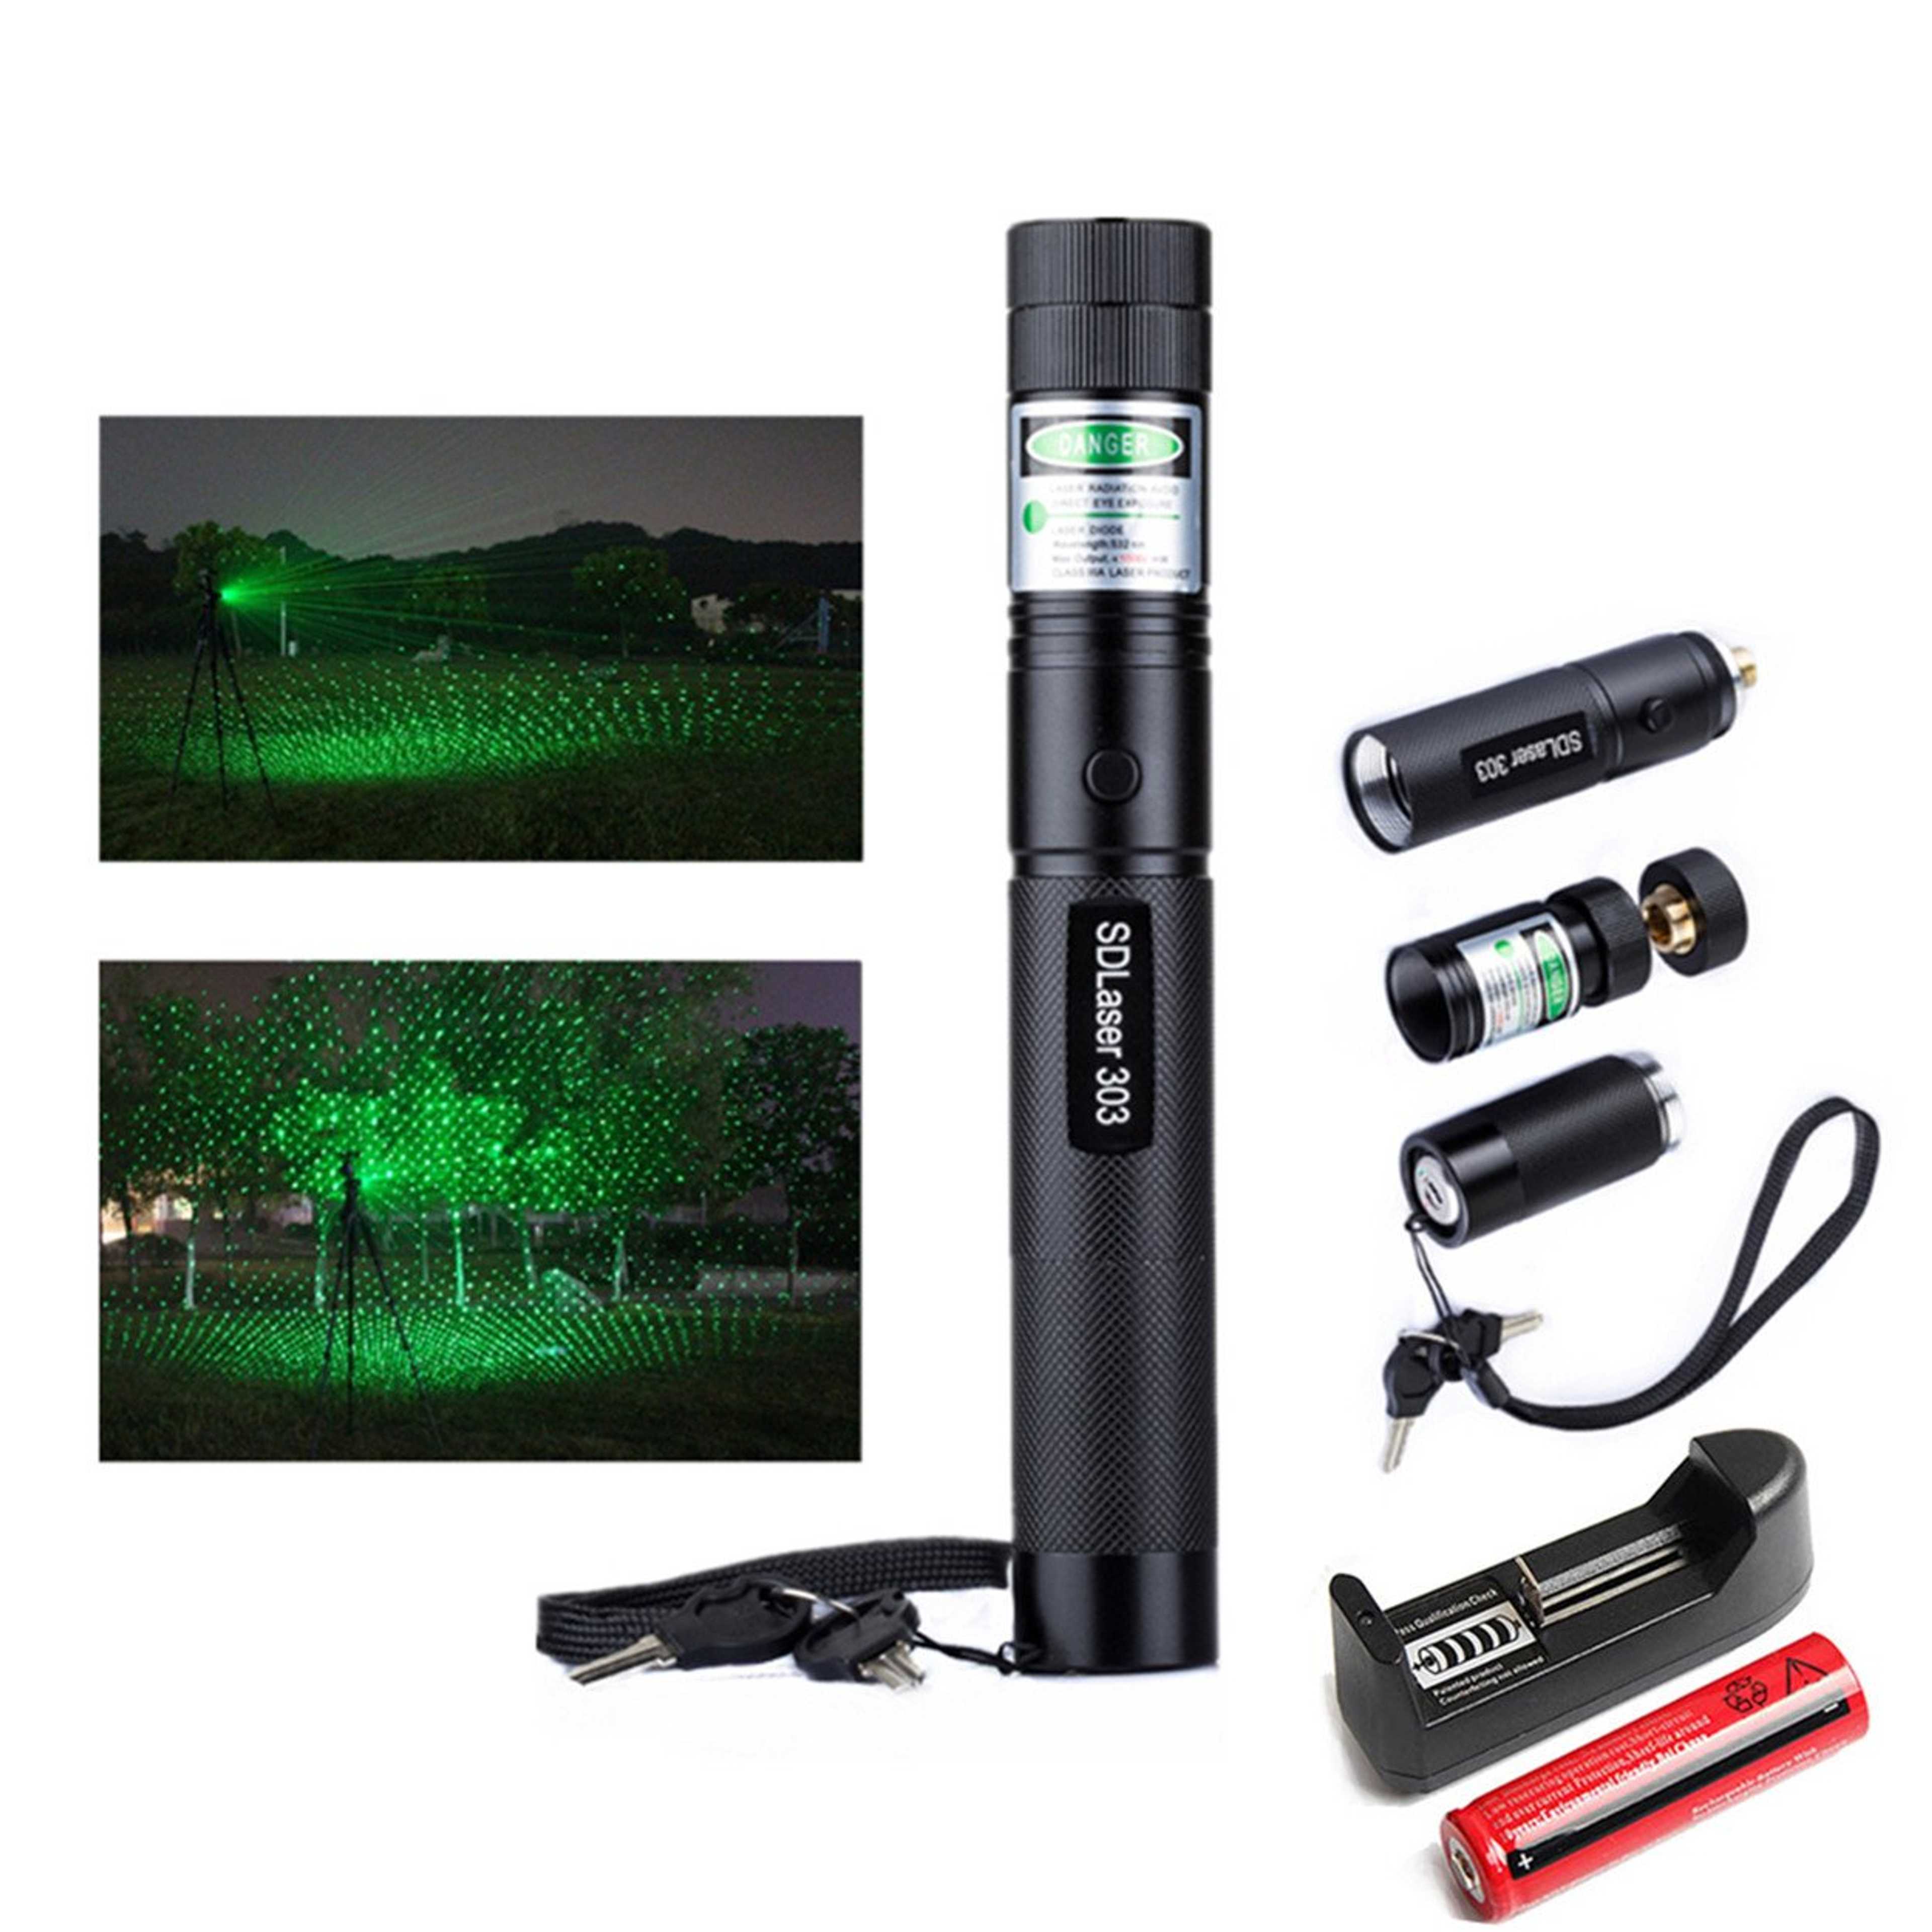 Rechargeable Powerful Green Laser Pointer – with more then 4 KM Range.